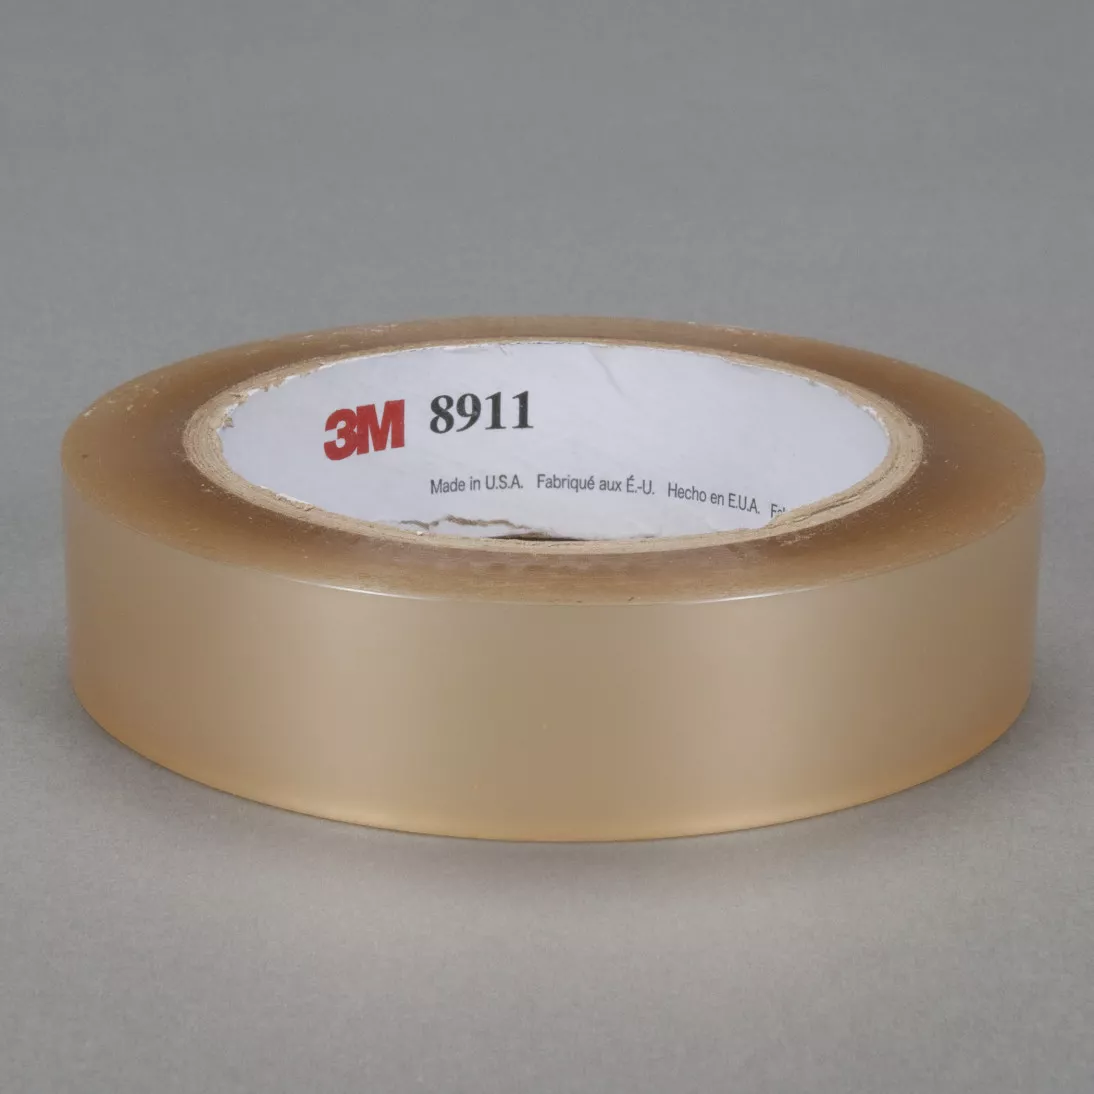 3M™ Polyester Tape 8911, Transparent, 24 in x 72 yd, 2.3 mil, 1 roll per
case